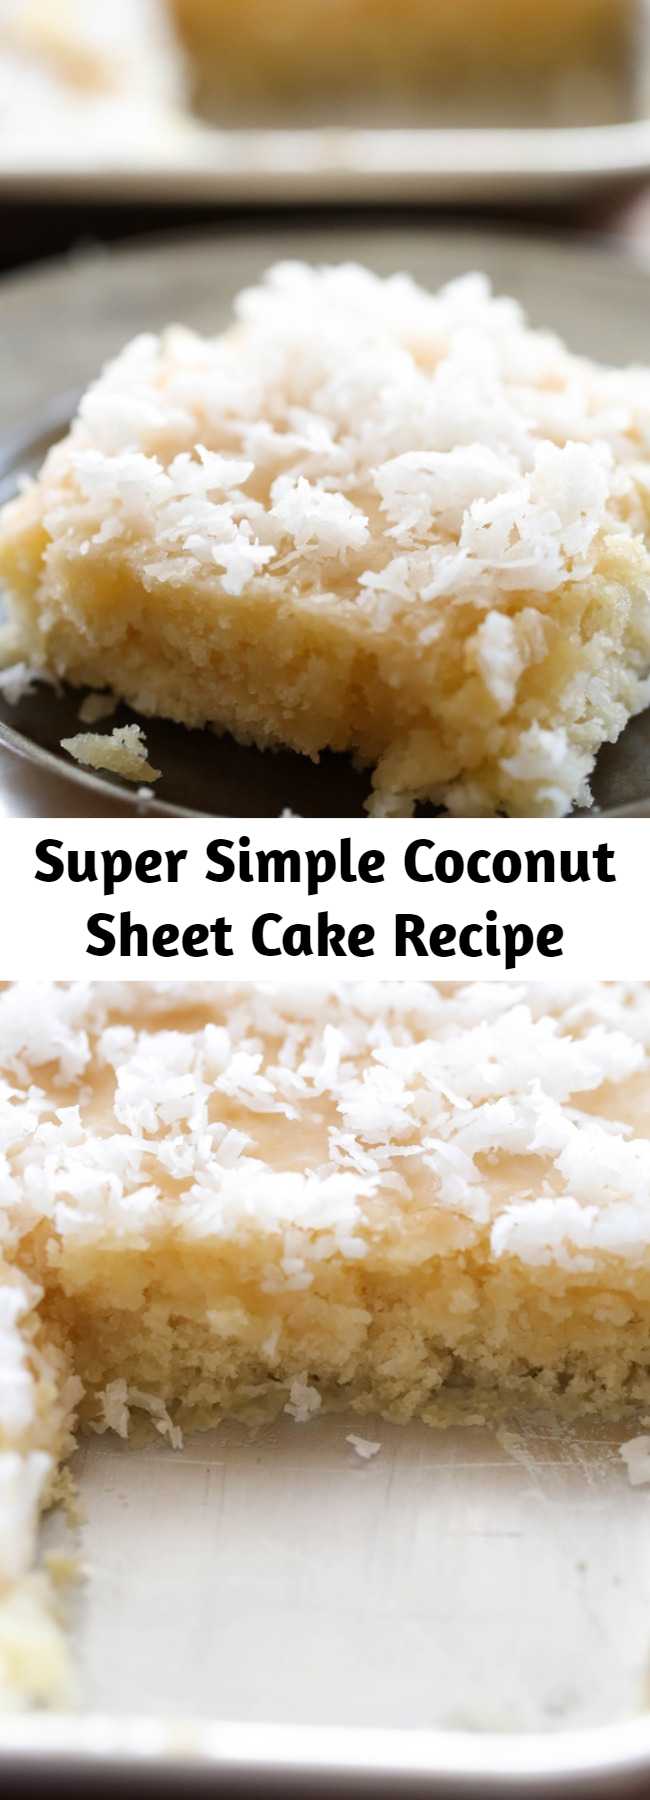 Super Simple Coconut Sheet Cake Recipe - This cake literally MELTS IN YOUR MOUTH!!! It is beyond delicious and super simple to make! One of my favorite cake recipes to date!